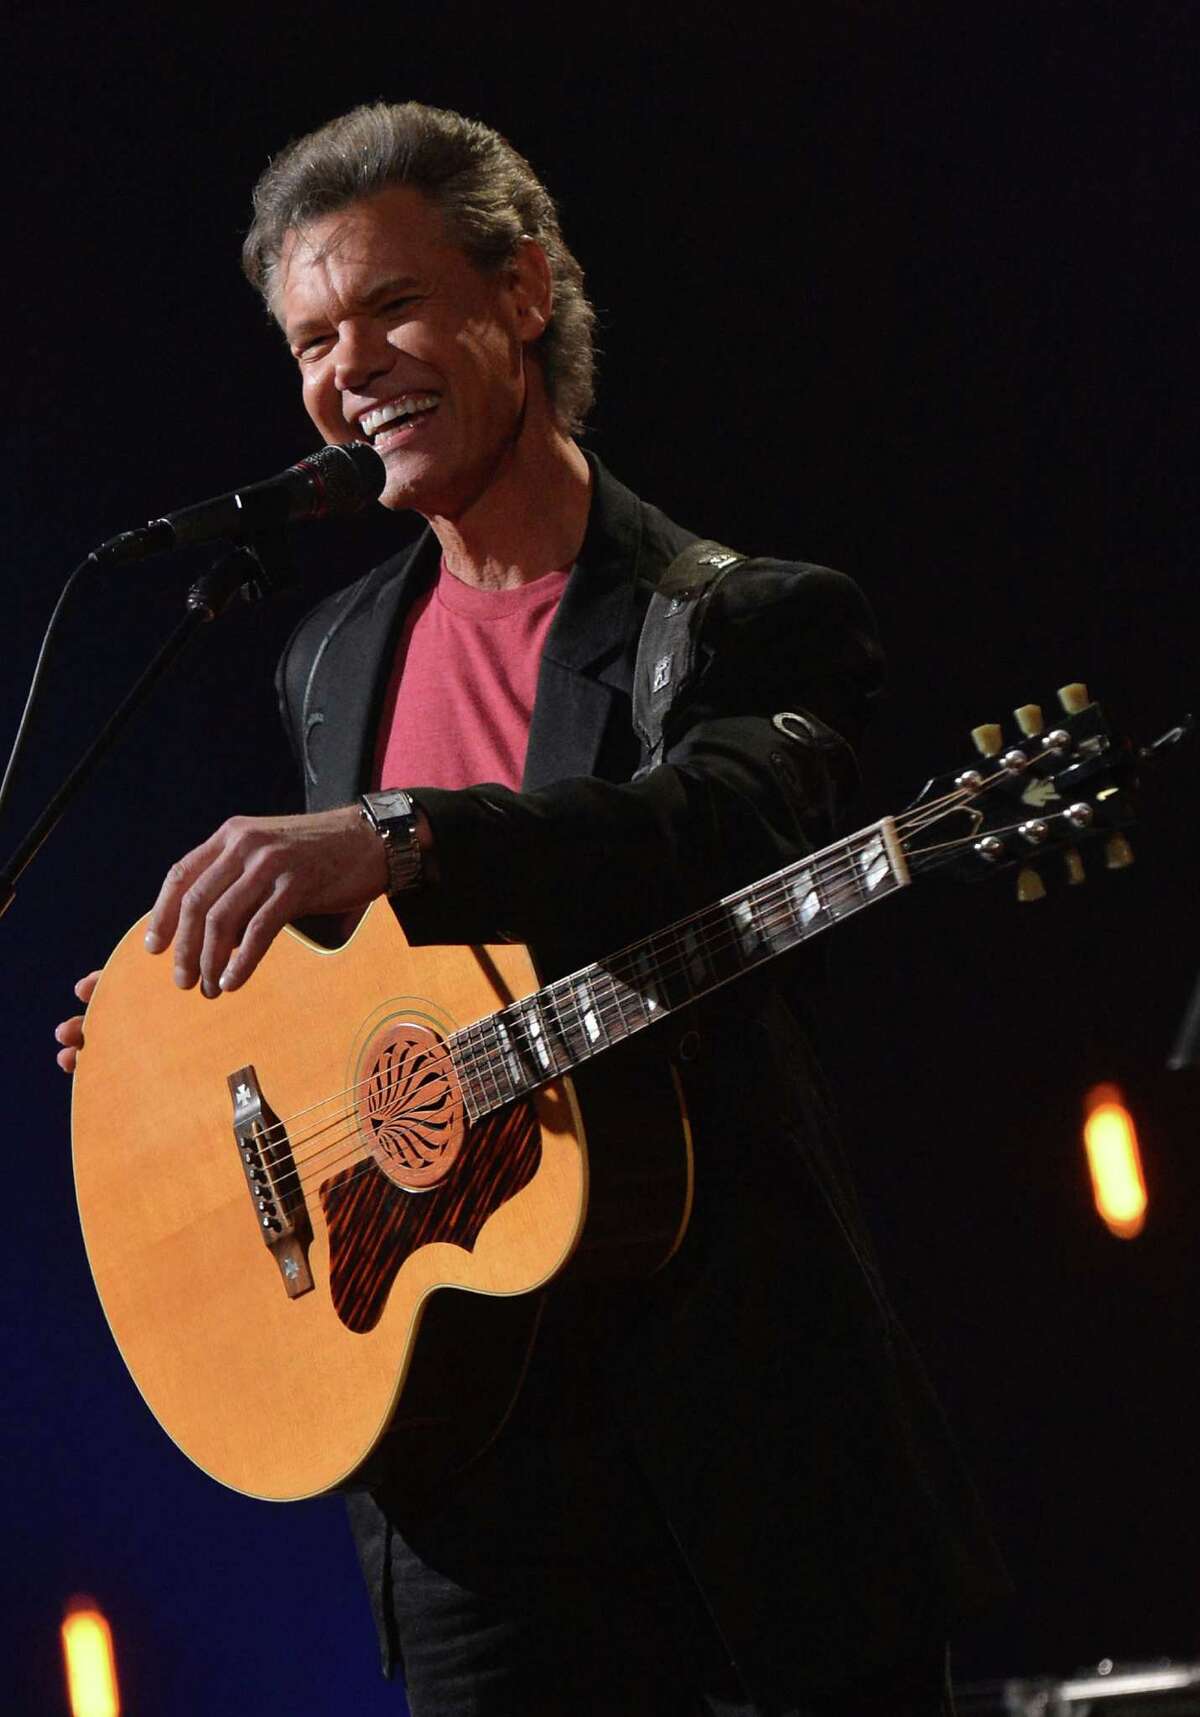 FRANKLIN, TN - OCTOBER 24: Randy Travis performs during CMT Crossroads: The Avett Brothers And Randy Travis tape at The Factory, Liberty Hall in Franklin, Tennessee on October 24, 2012 CMT Crossroads: The Avett Brothers And Randy Travis airs only on CMT November 23rd 2012